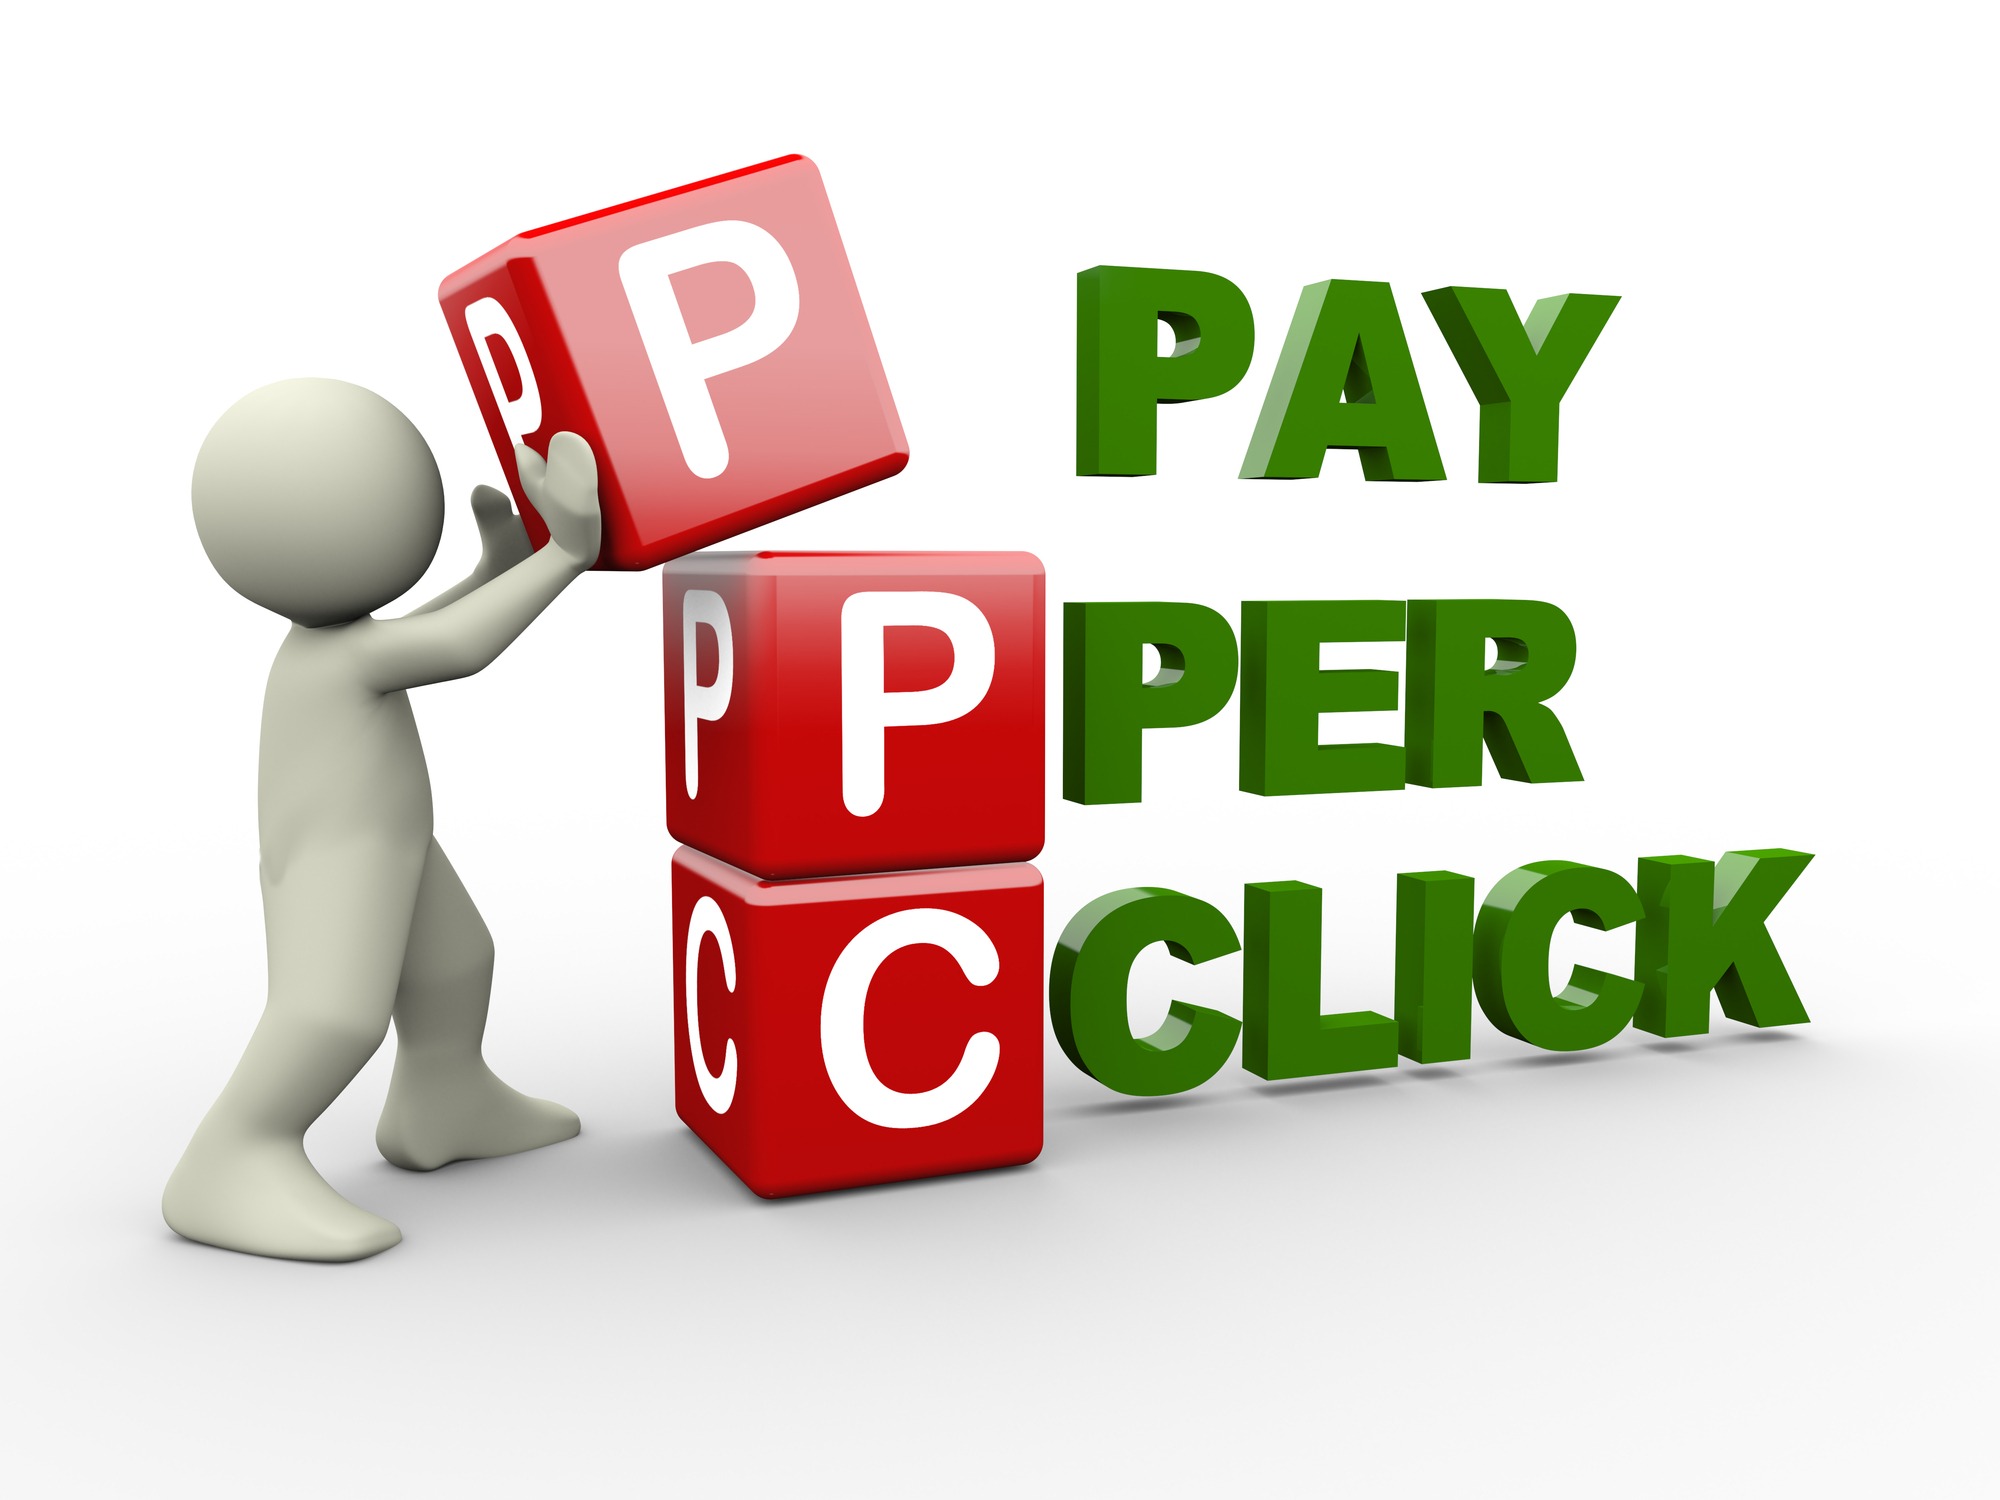 Bidding on Brand Terms for PPC: Smart or Not?